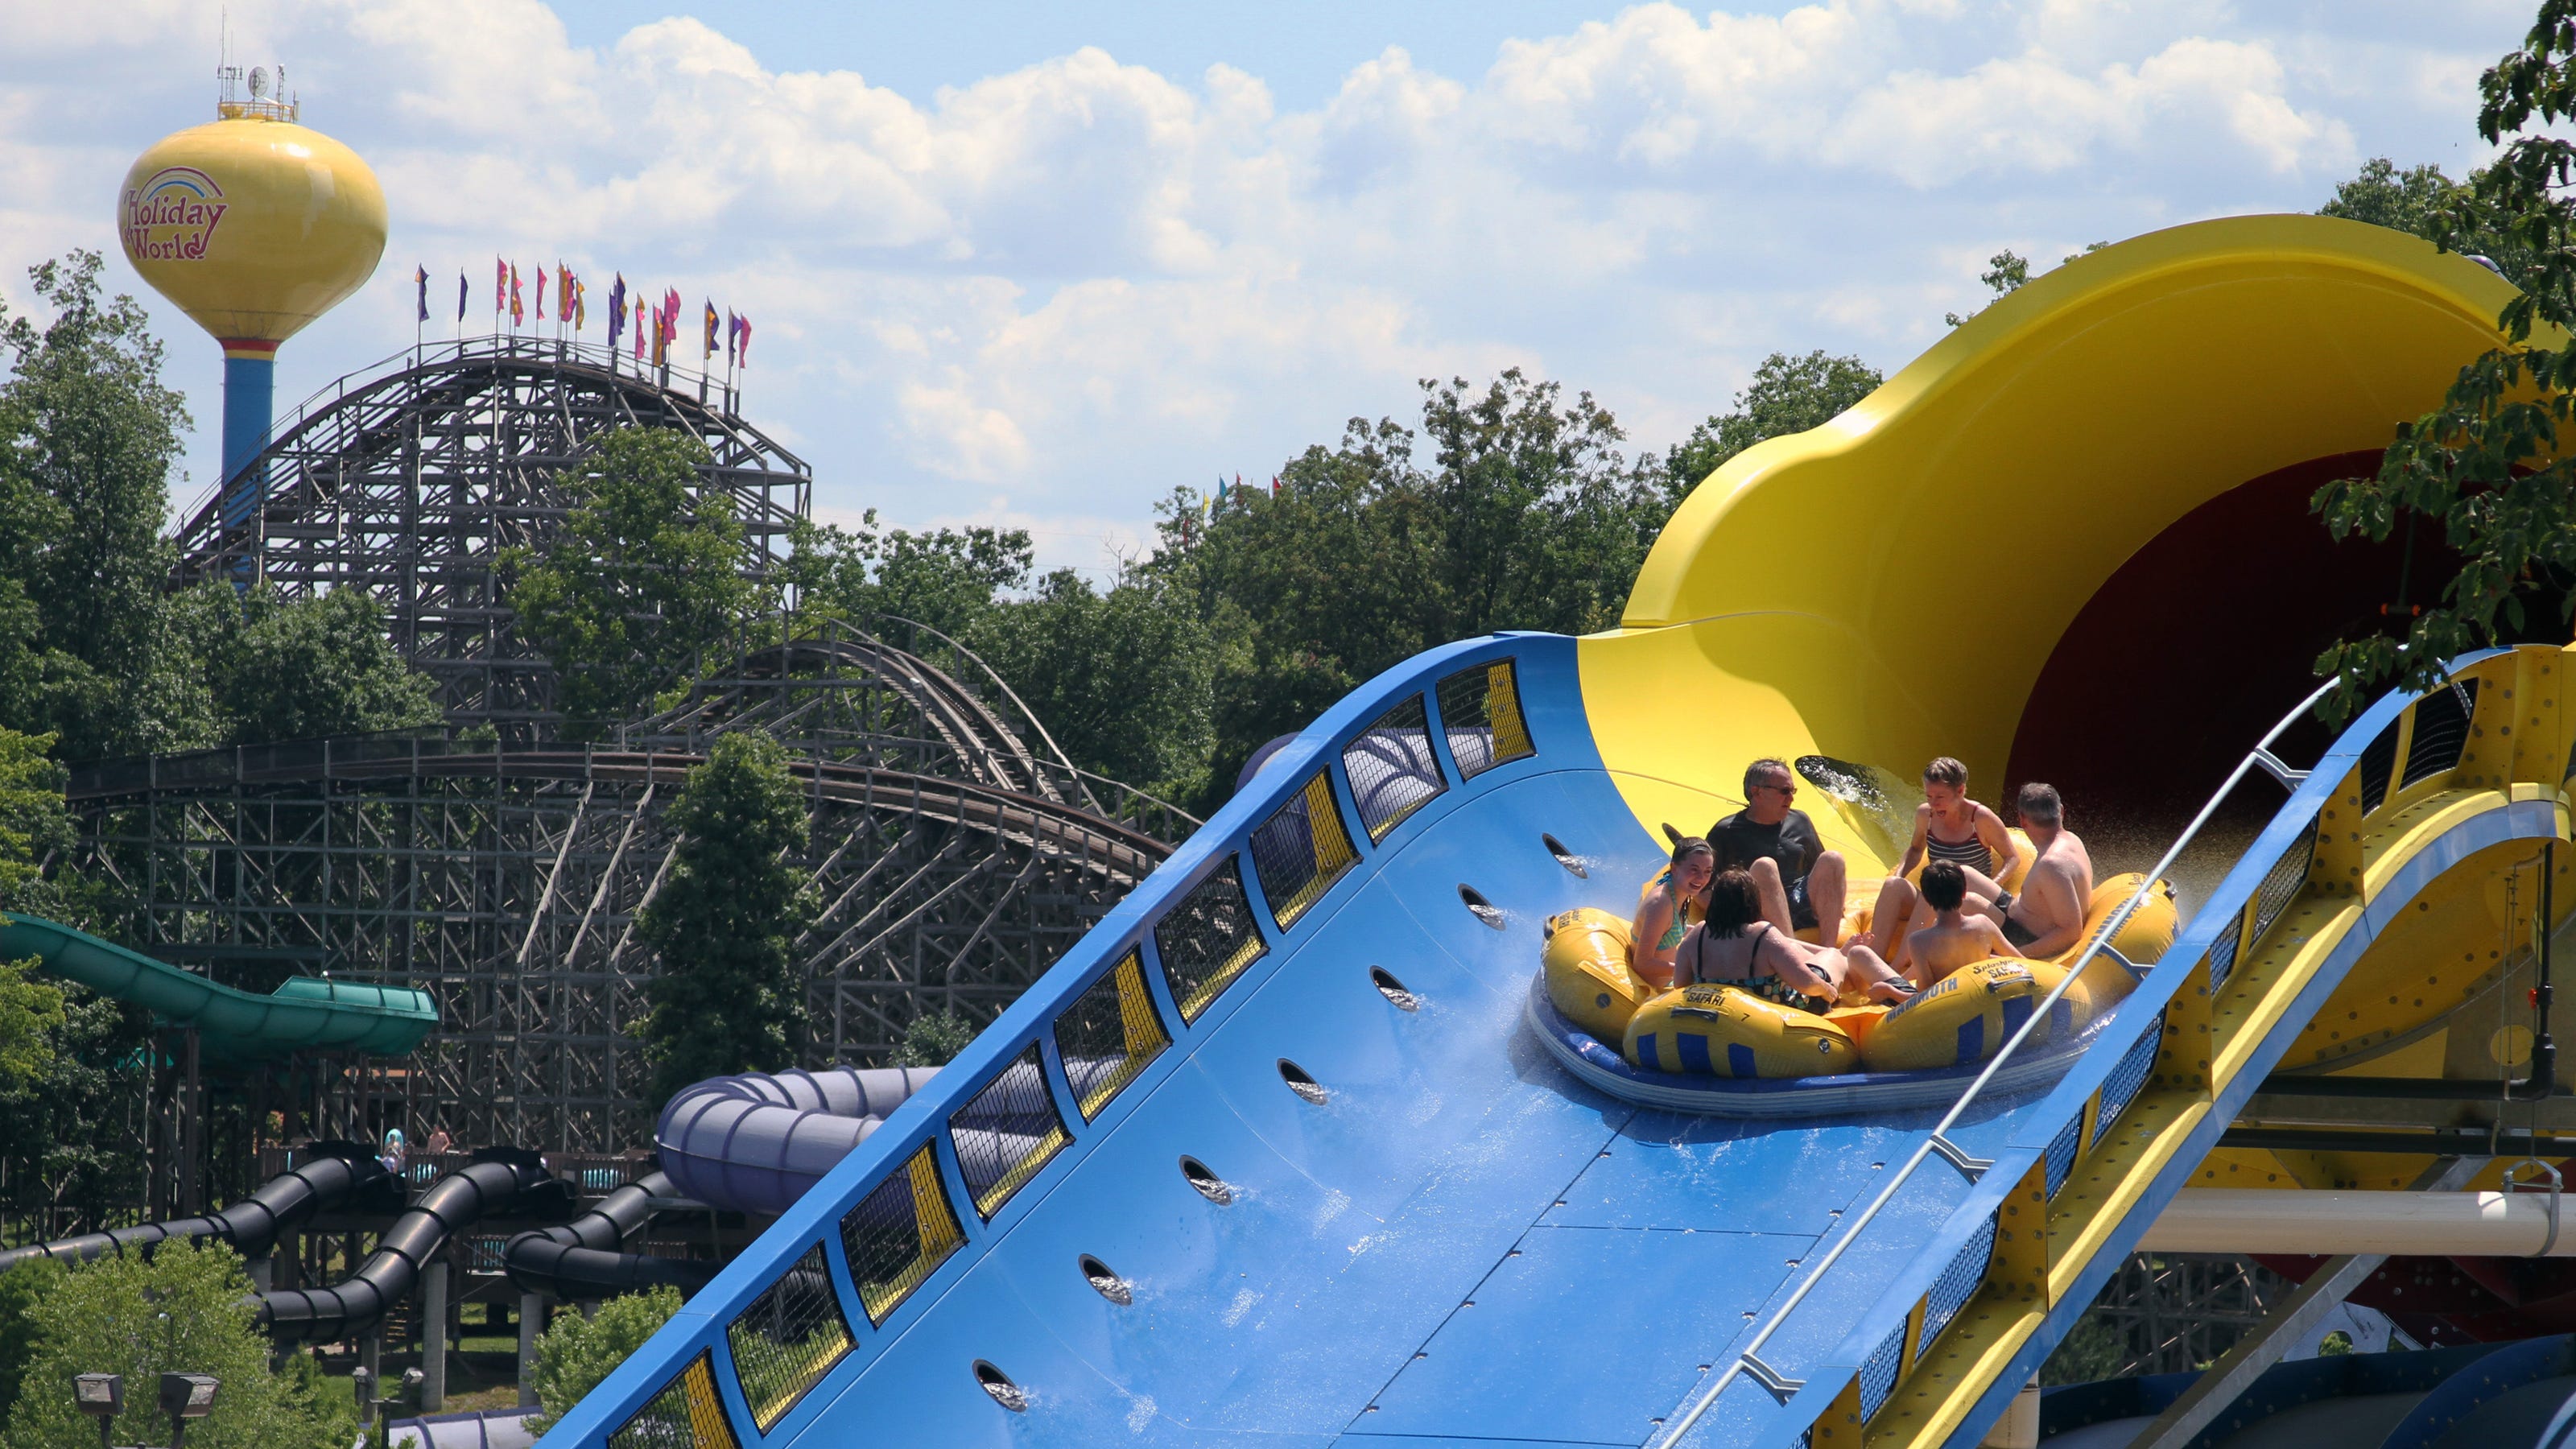 Holiday World 2019 Tickets, hours and more in Santa Claus, Indiana